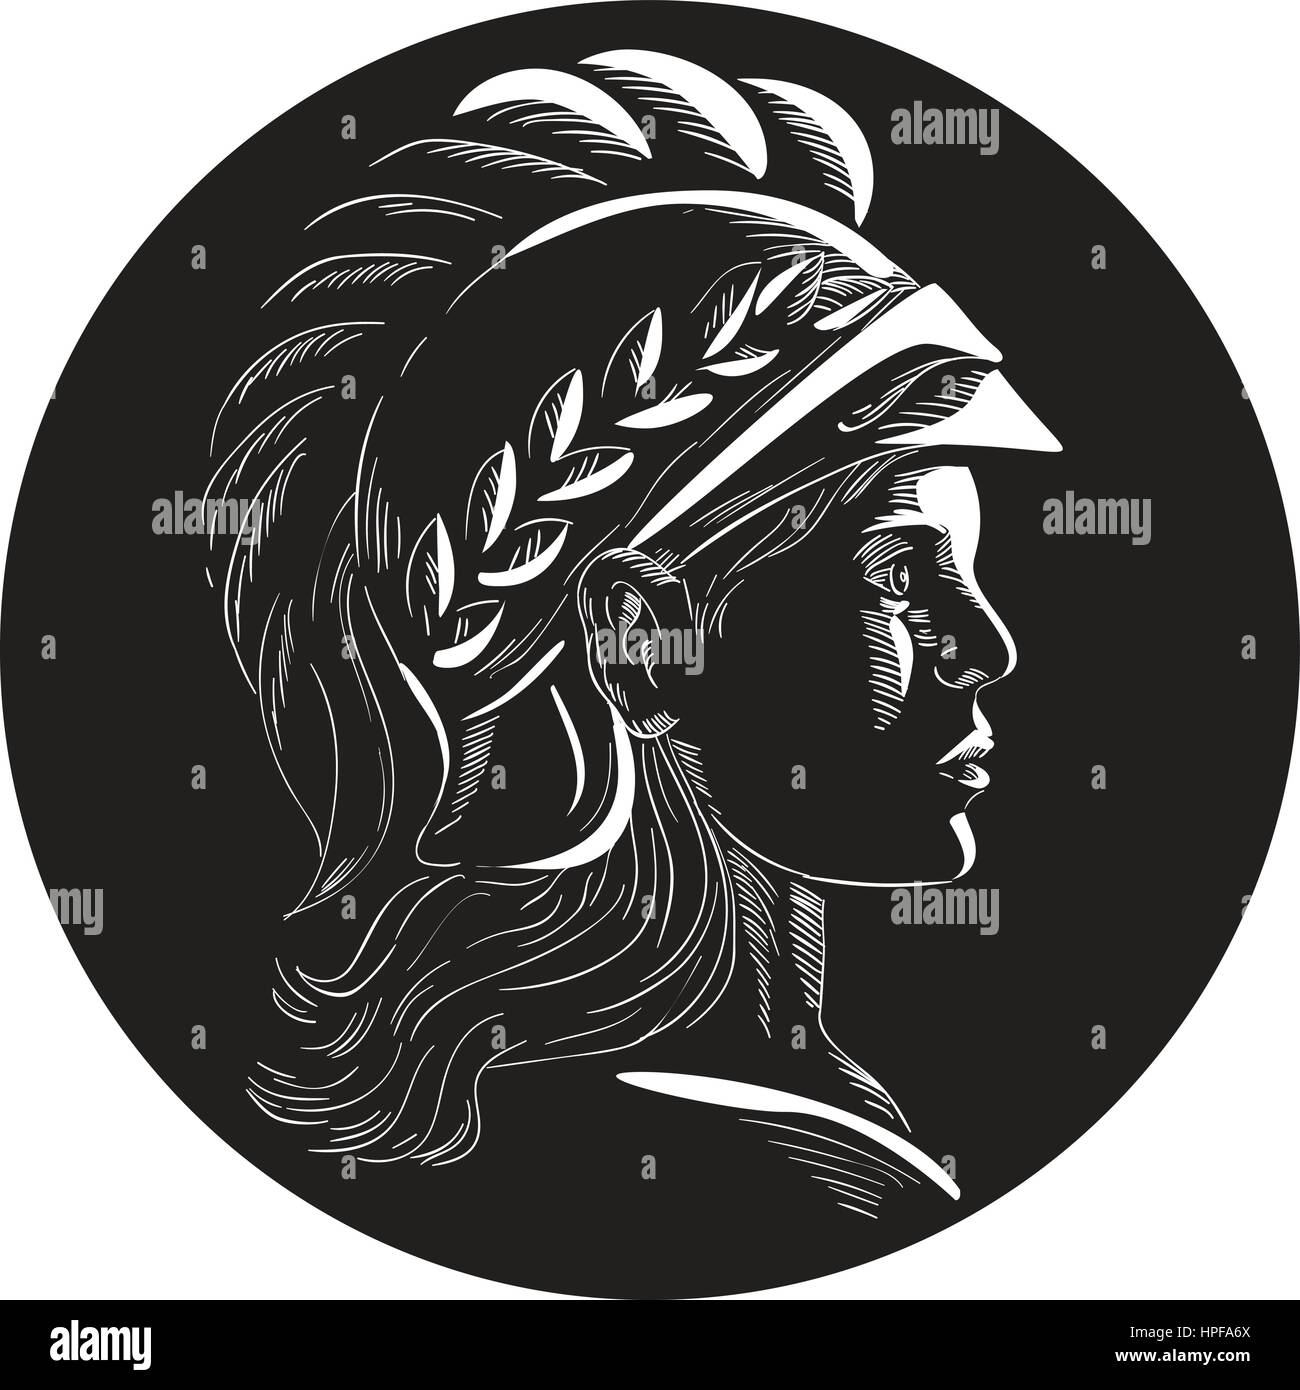 Illustration of Minerva or Menrva, the Roman goddess of wisdom and sponsor of arts, trade, and strategy wearing helmet and laurel crown viewed from si Stock Vector